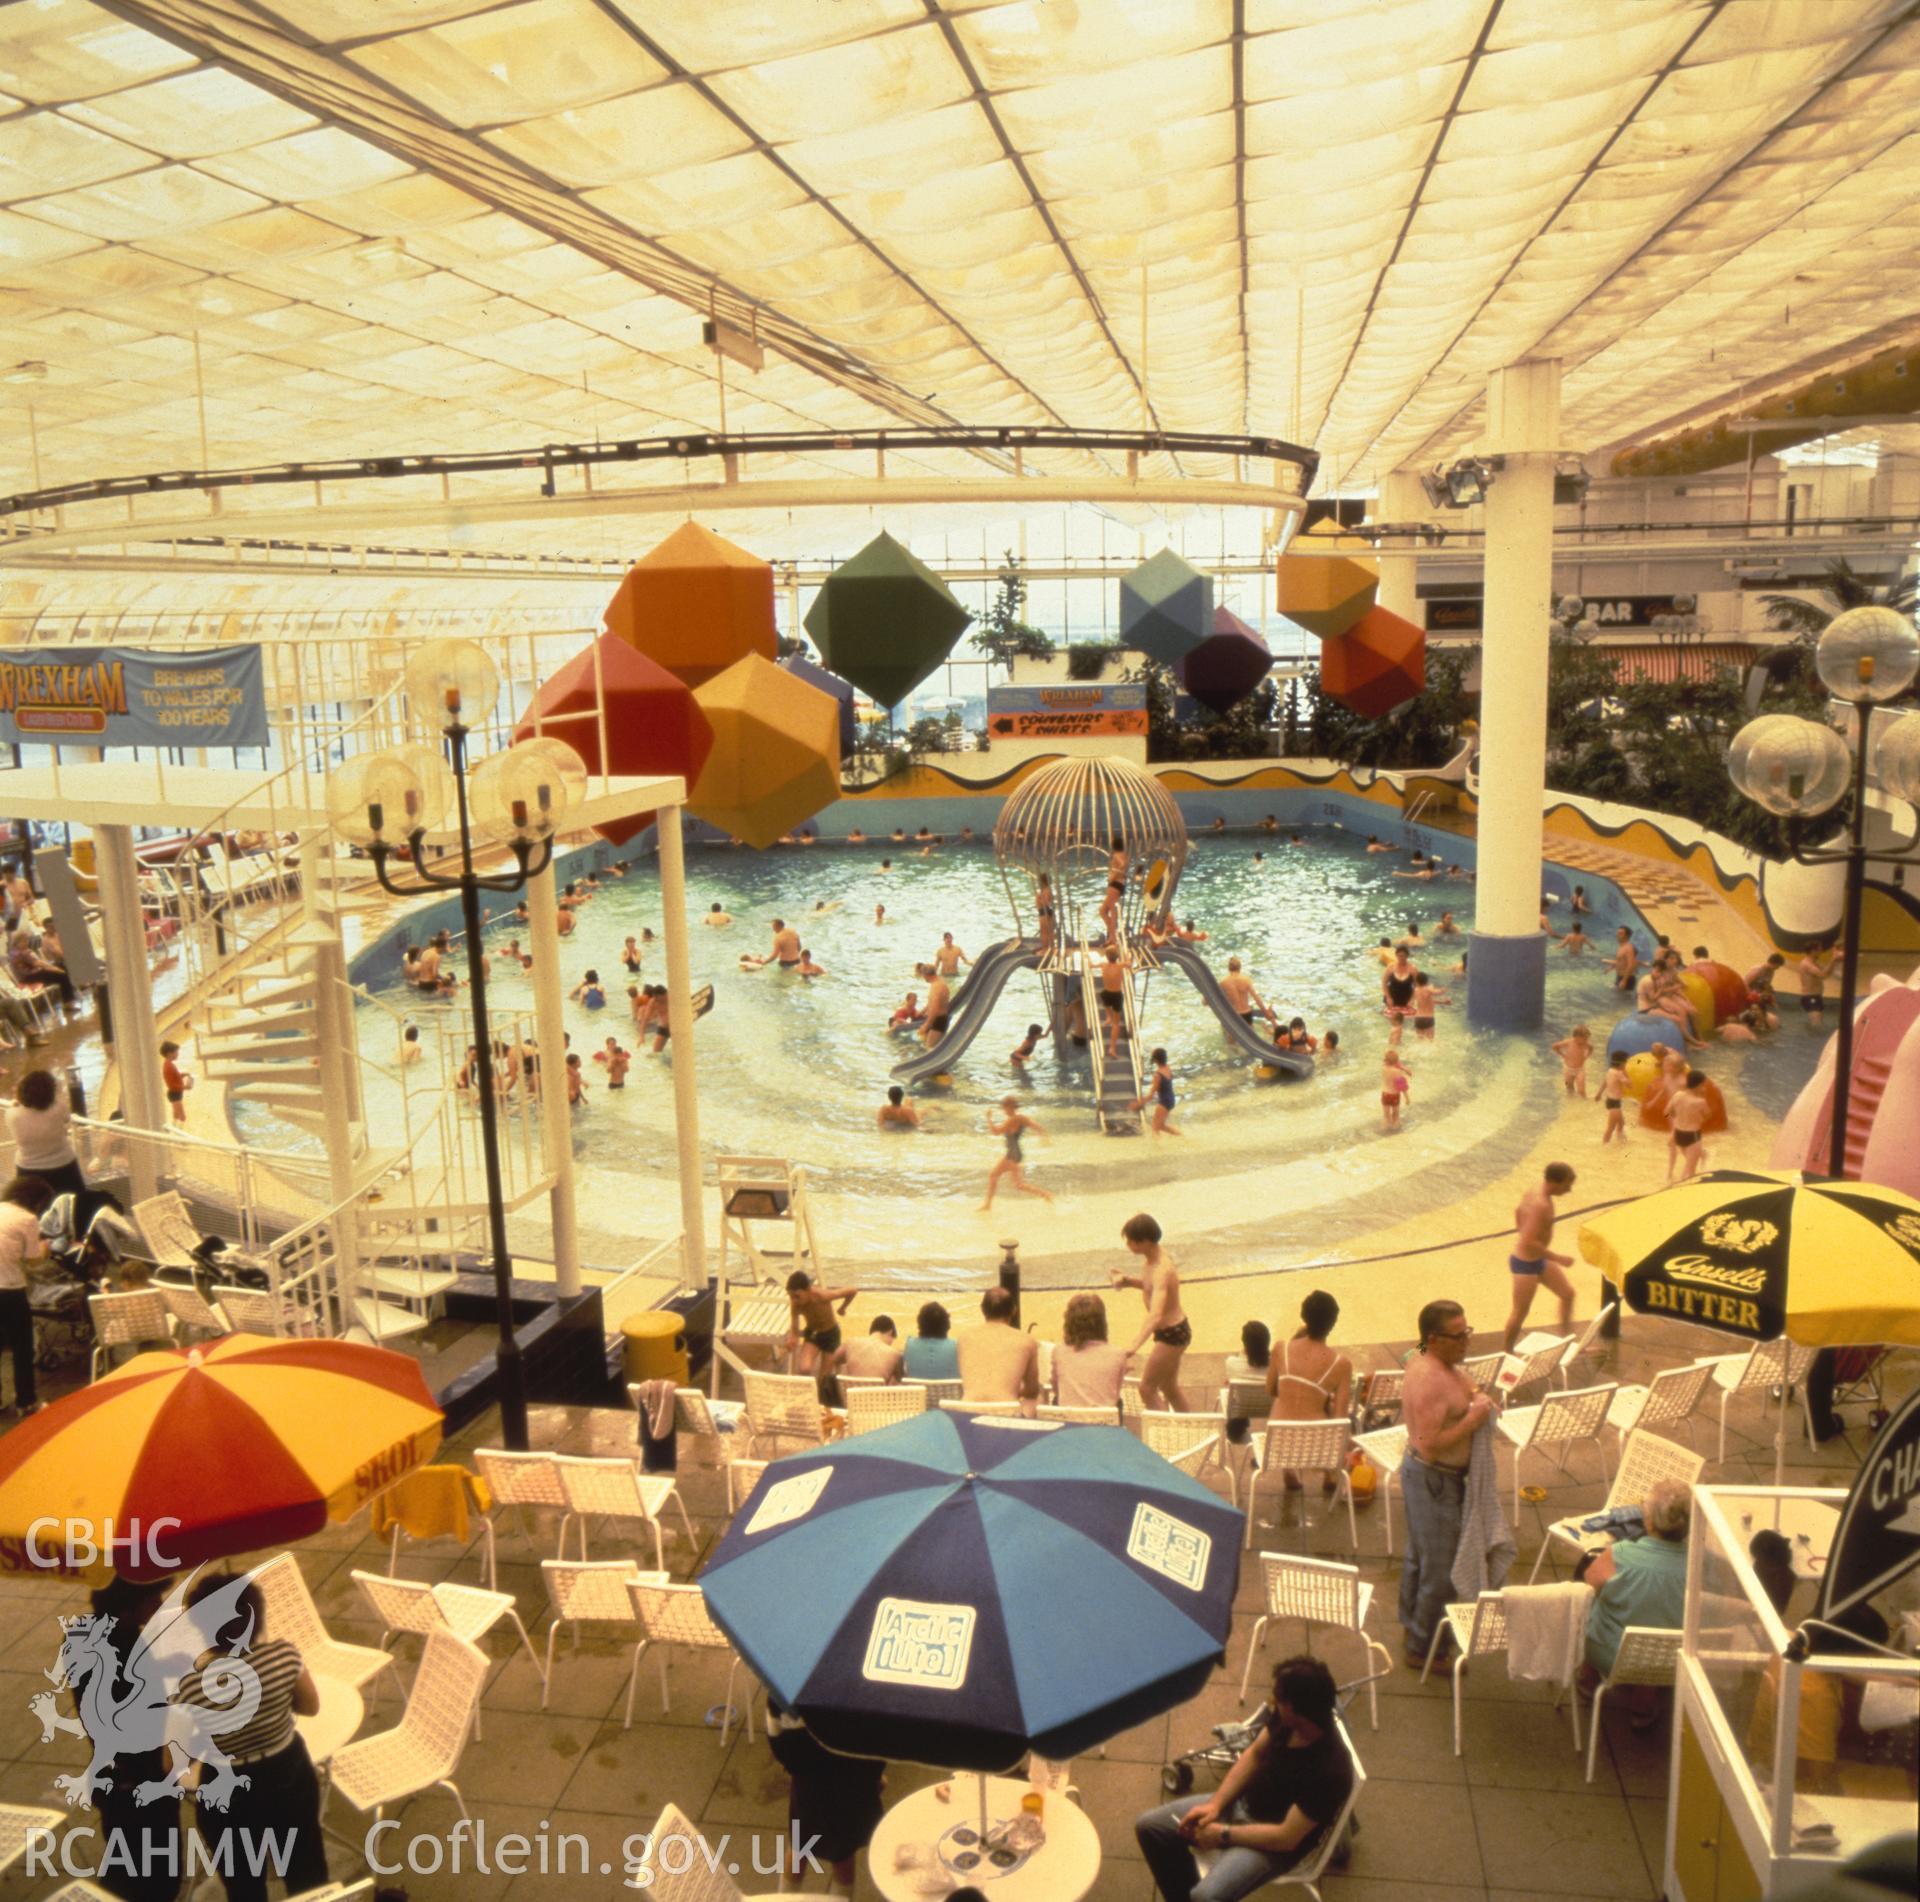 1 colour transparency showing interior view of swimming pool at Rhyl Sun Centre; collated by the former Central Office of Information.